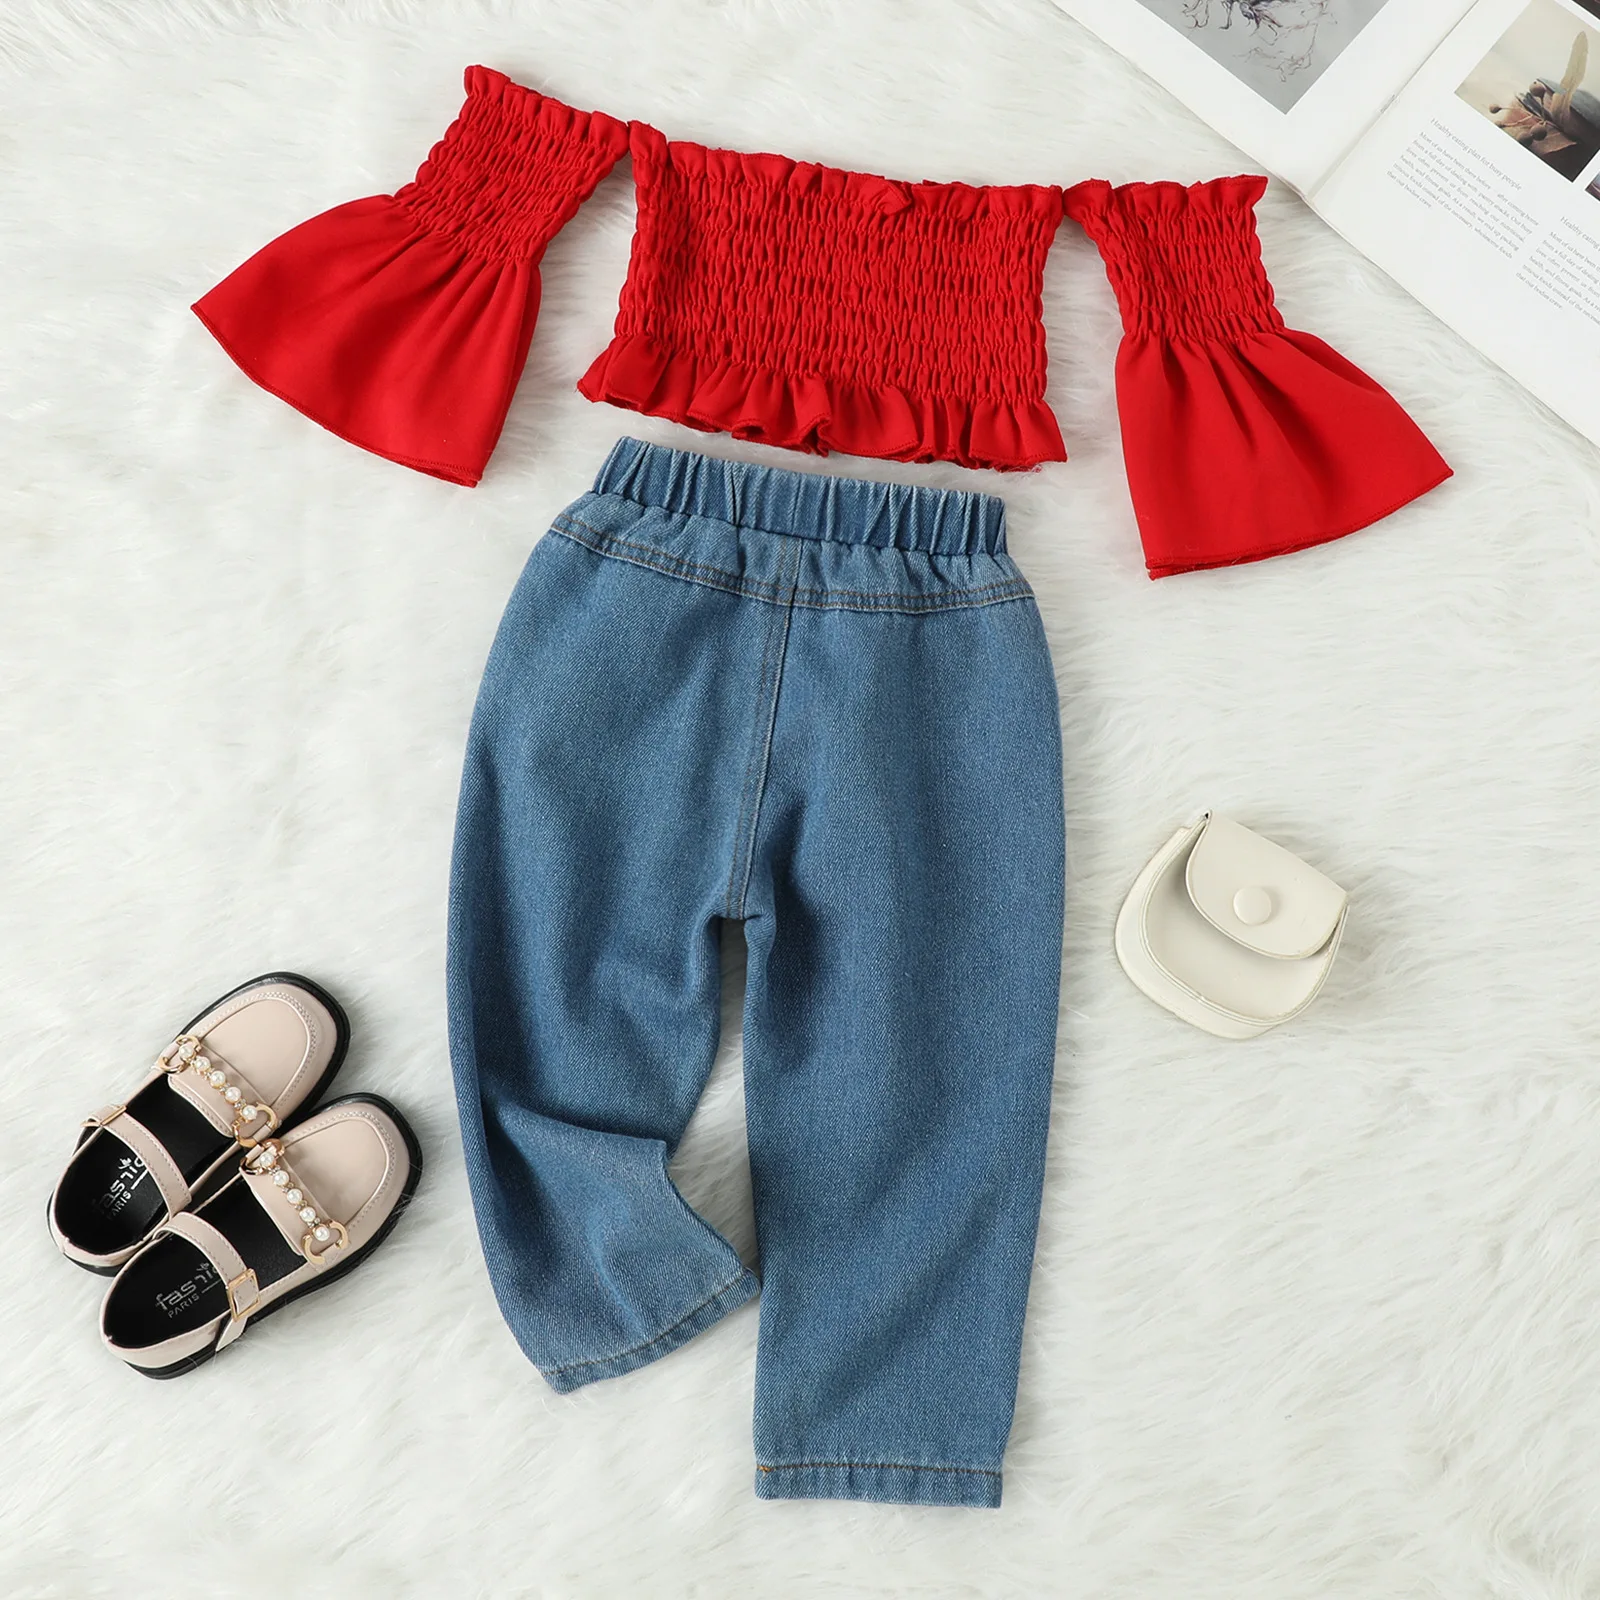 Toddler baby girls clothing outfits boutique off shoulder shirts tops+ripped denim trousers two piece clothes for kids